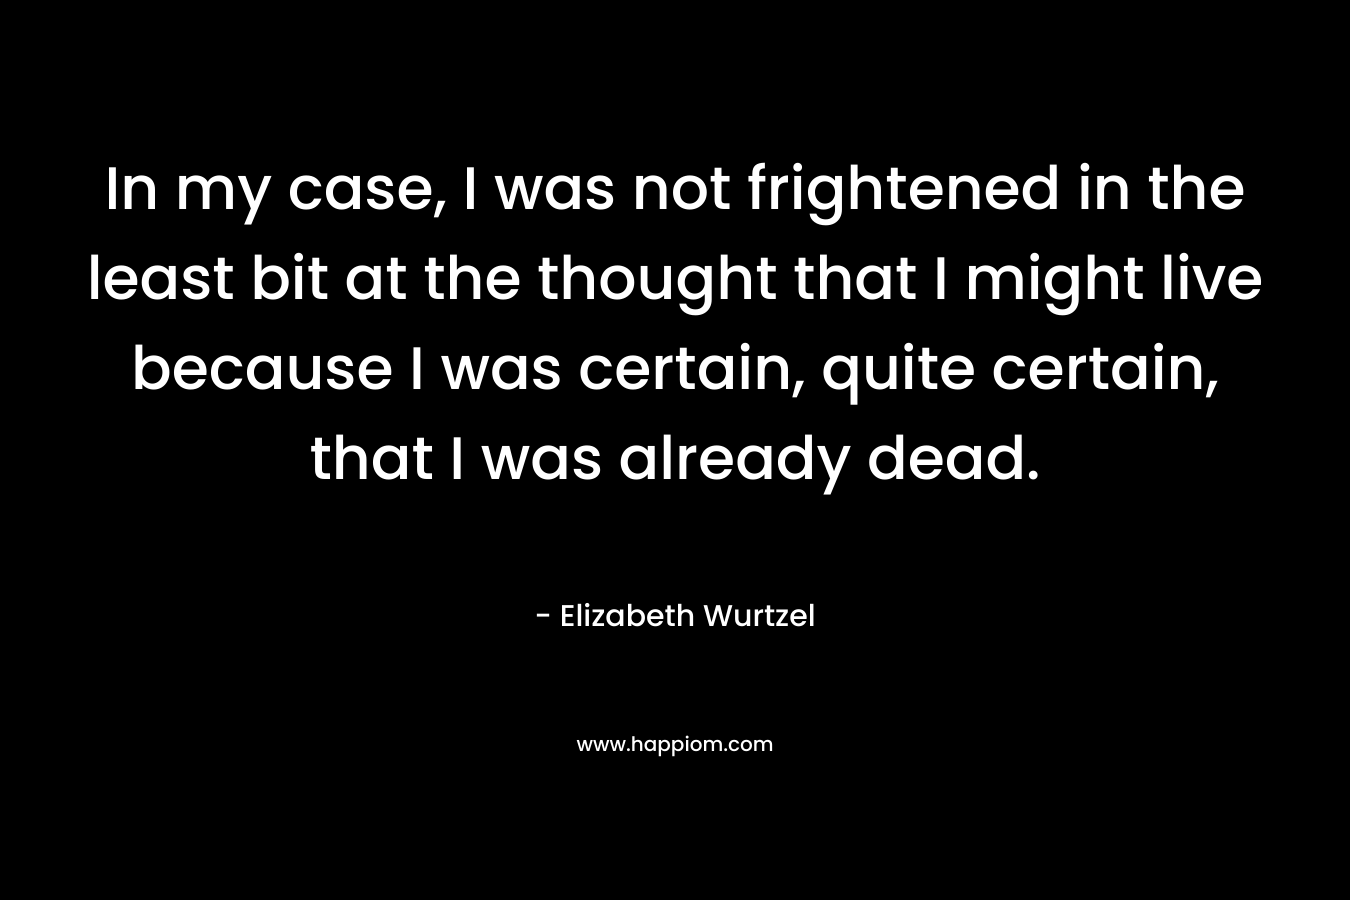 In my case, I was not frightened in the least bit at the thought that I might live because I was certain, quite certain, that I was already dead. 